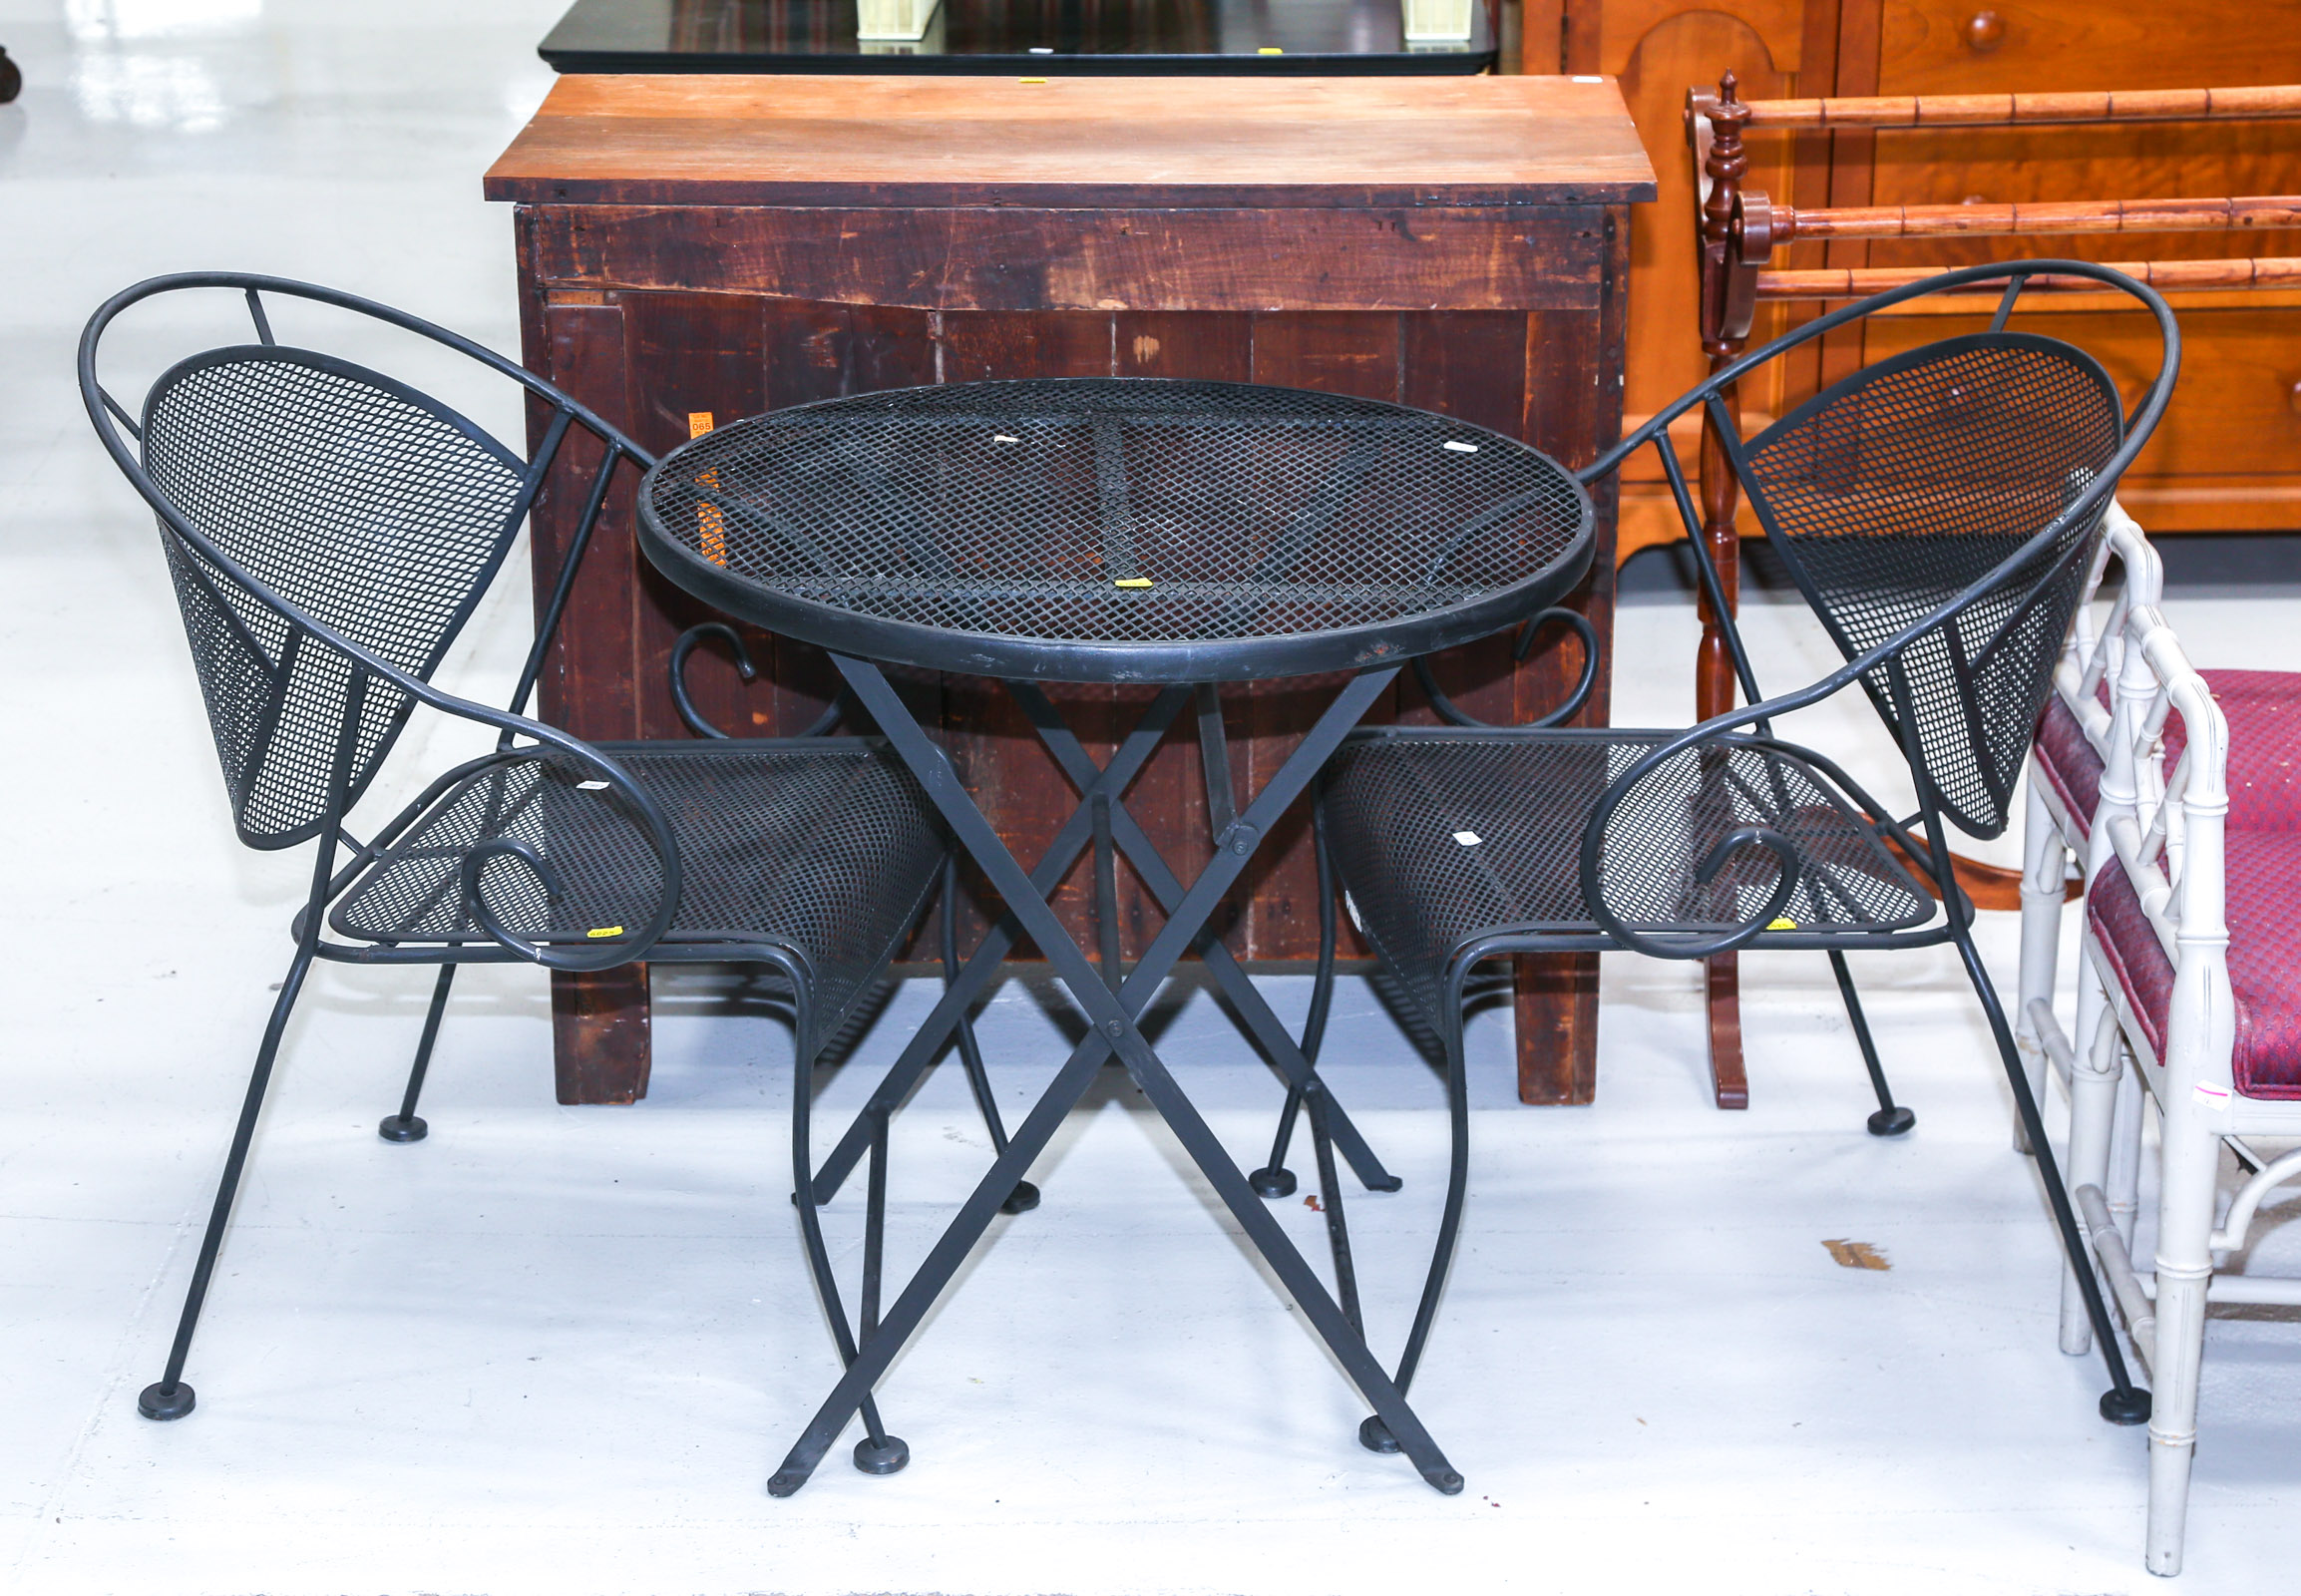 TWO IRON PATIO CHAIRS WITH MATCHING